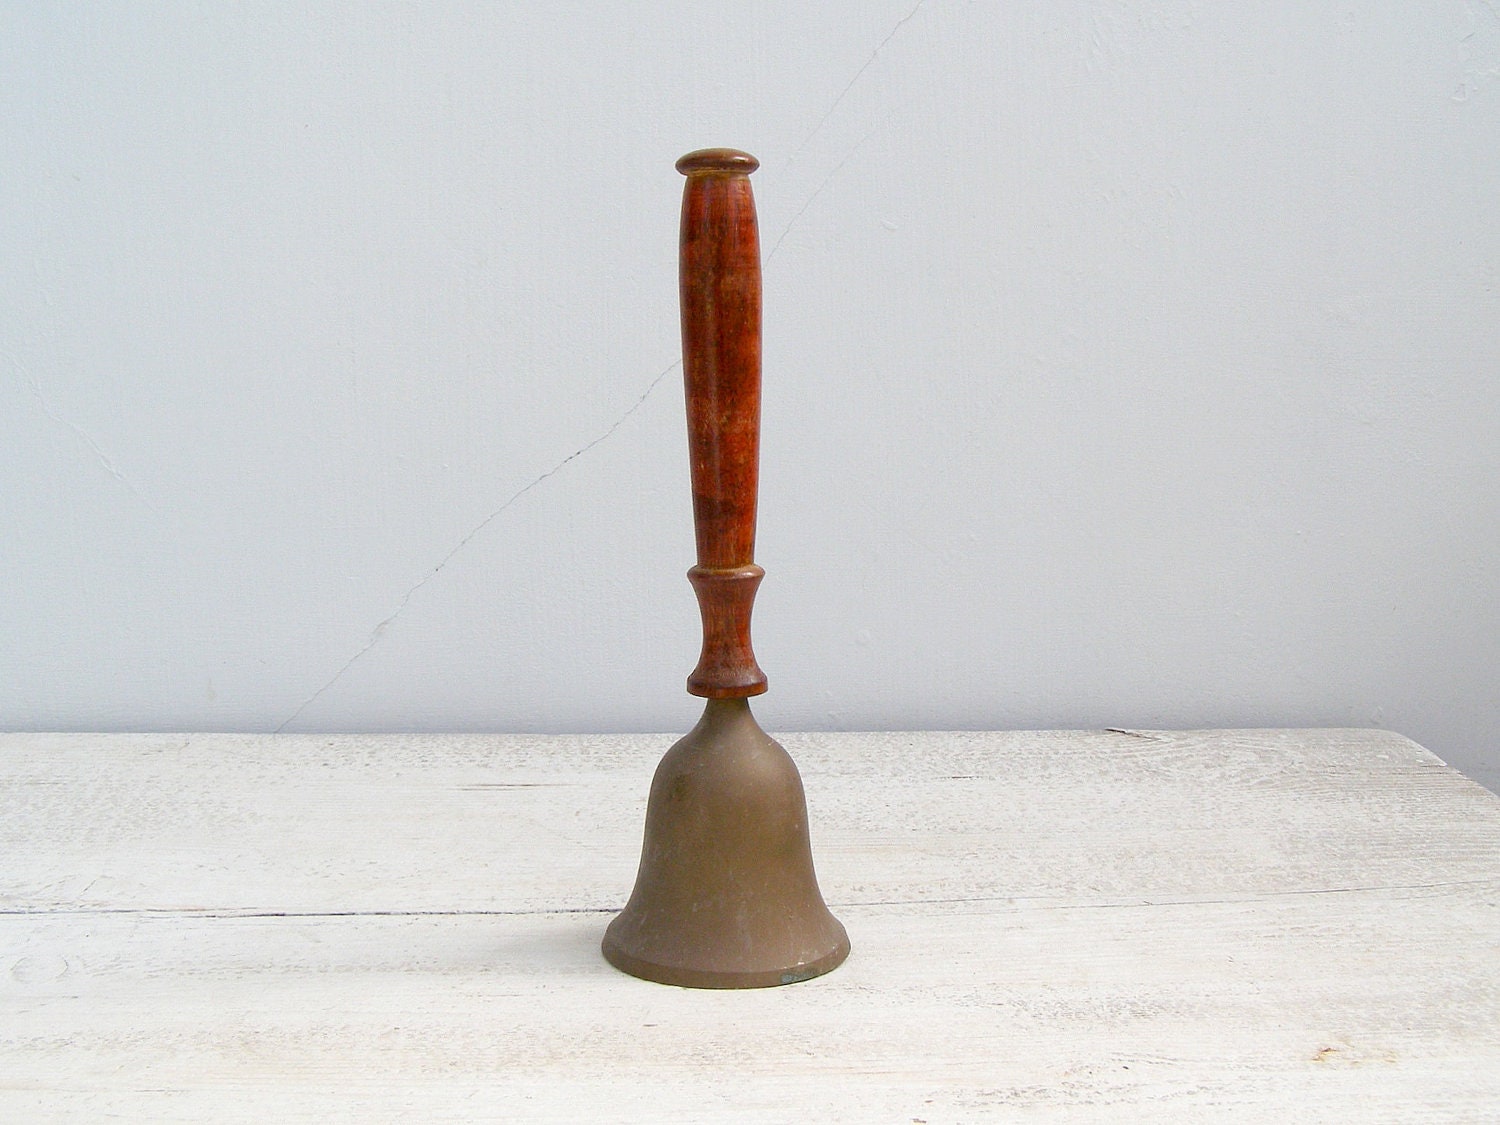 Vintage Bronze Copper Dinner Bell, mid century wood handle bell, Rustic counter bell,  School house bell, Party bell, Christmas Bell